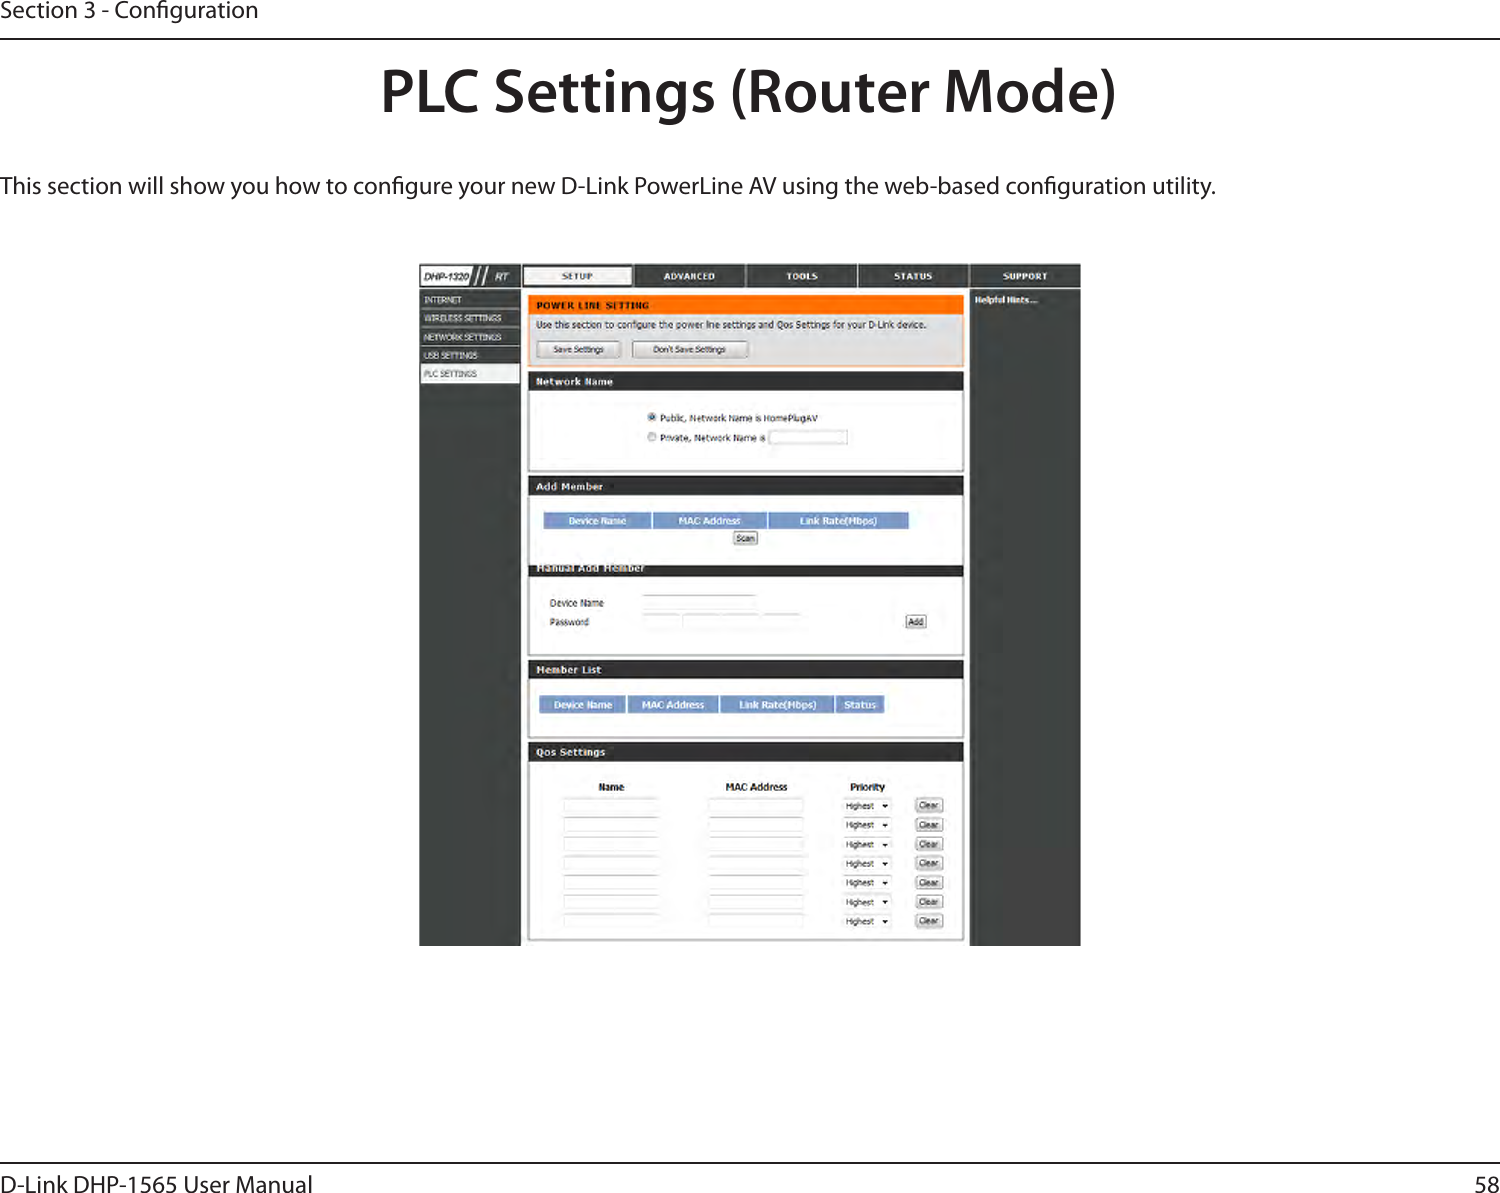 58D-Link DHP-1565 User ManualSection 3 - CongurationThis section will show you how to congure your new D-Link PowerLine AV using the web-based conguration utility.PLC Settings (Router Mode)